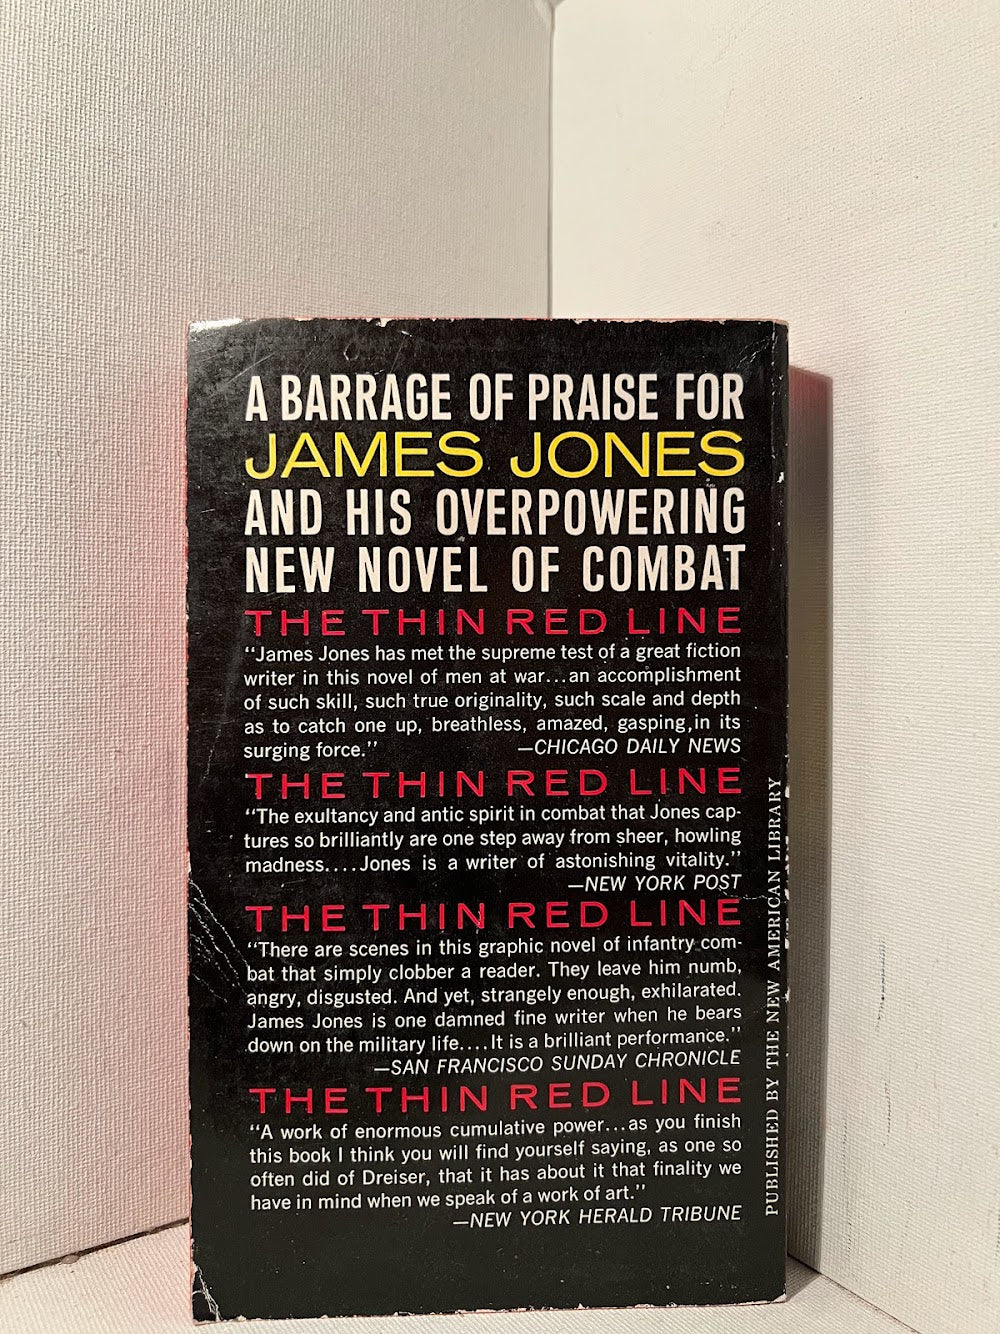 The Thin Red Line by James Jones